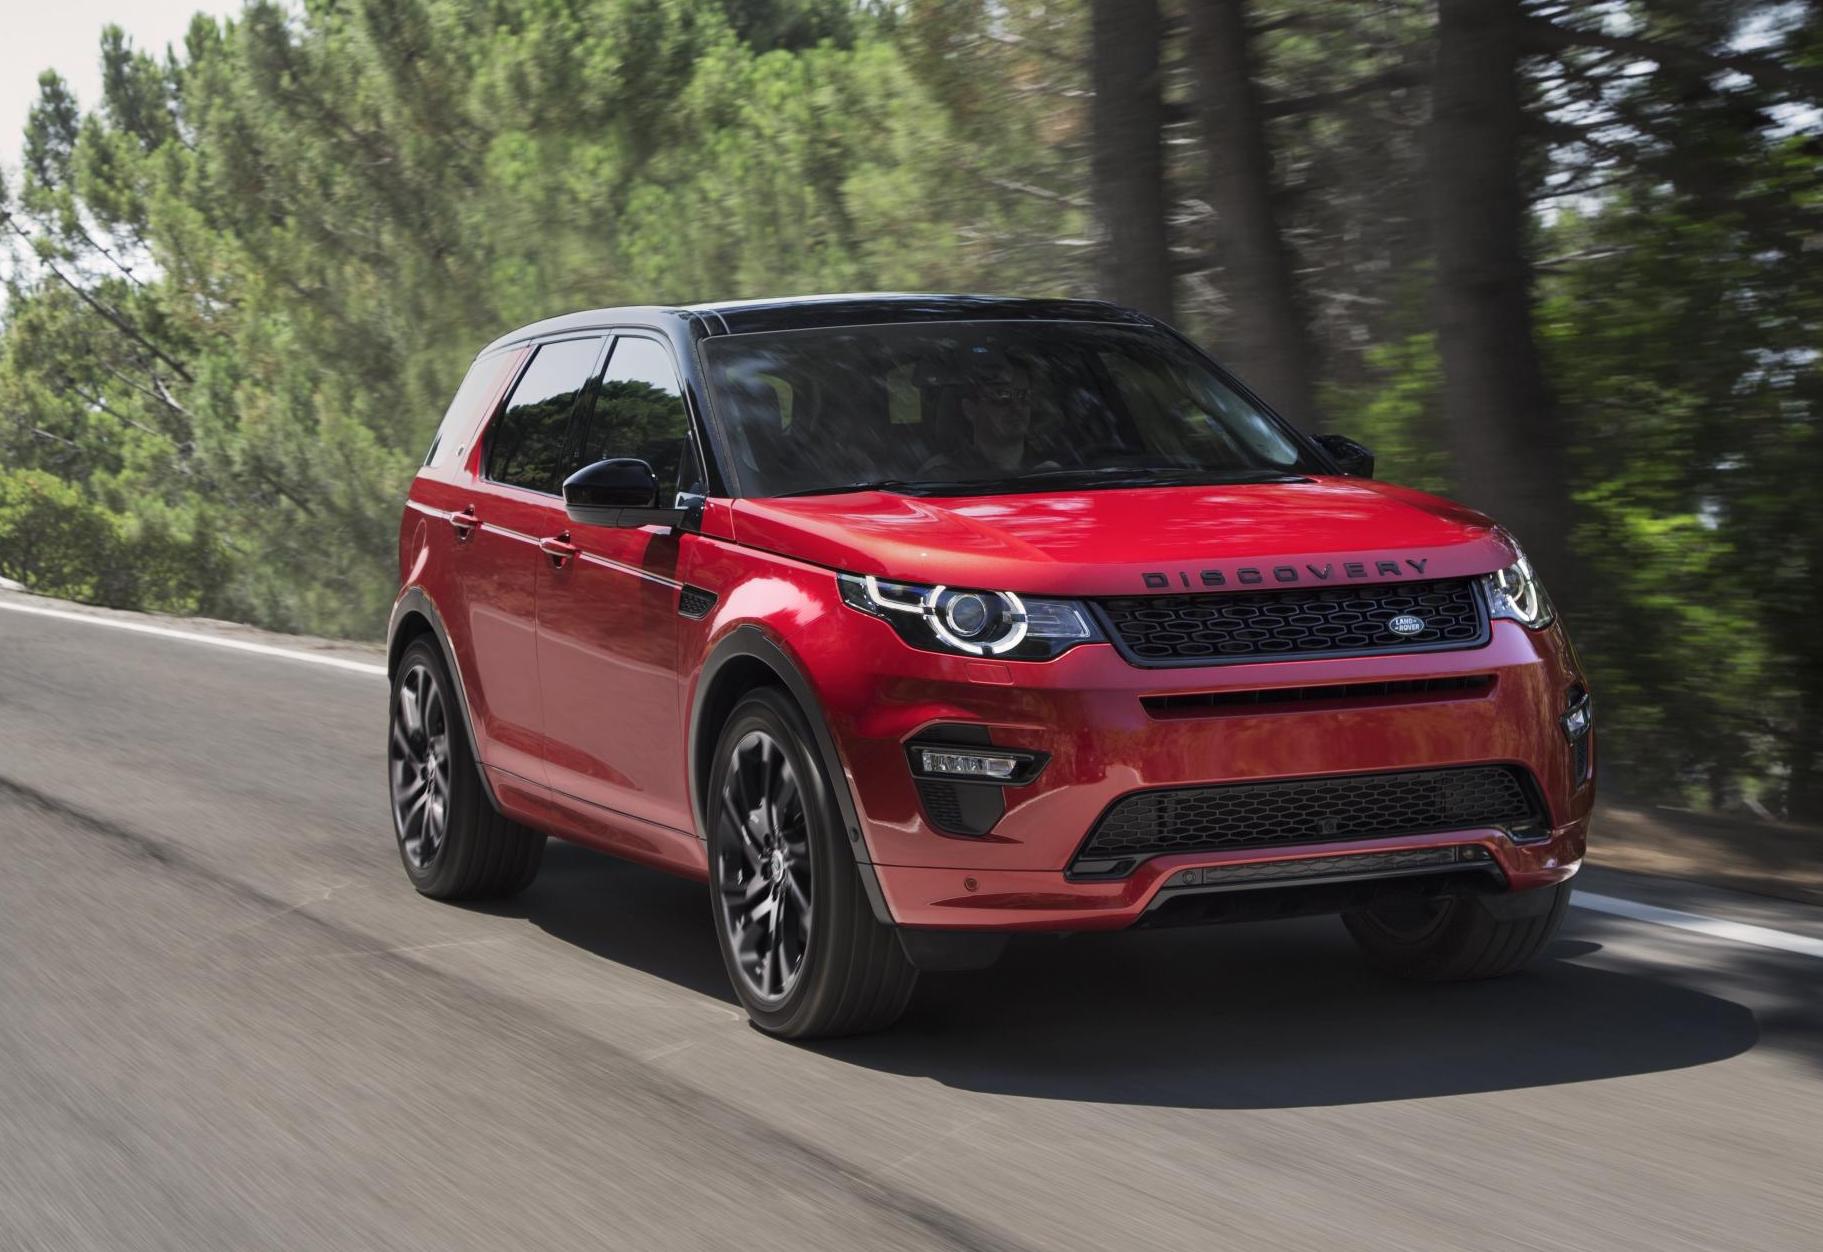 2020 Land Rover Discovery Sport to switch to new platform – report